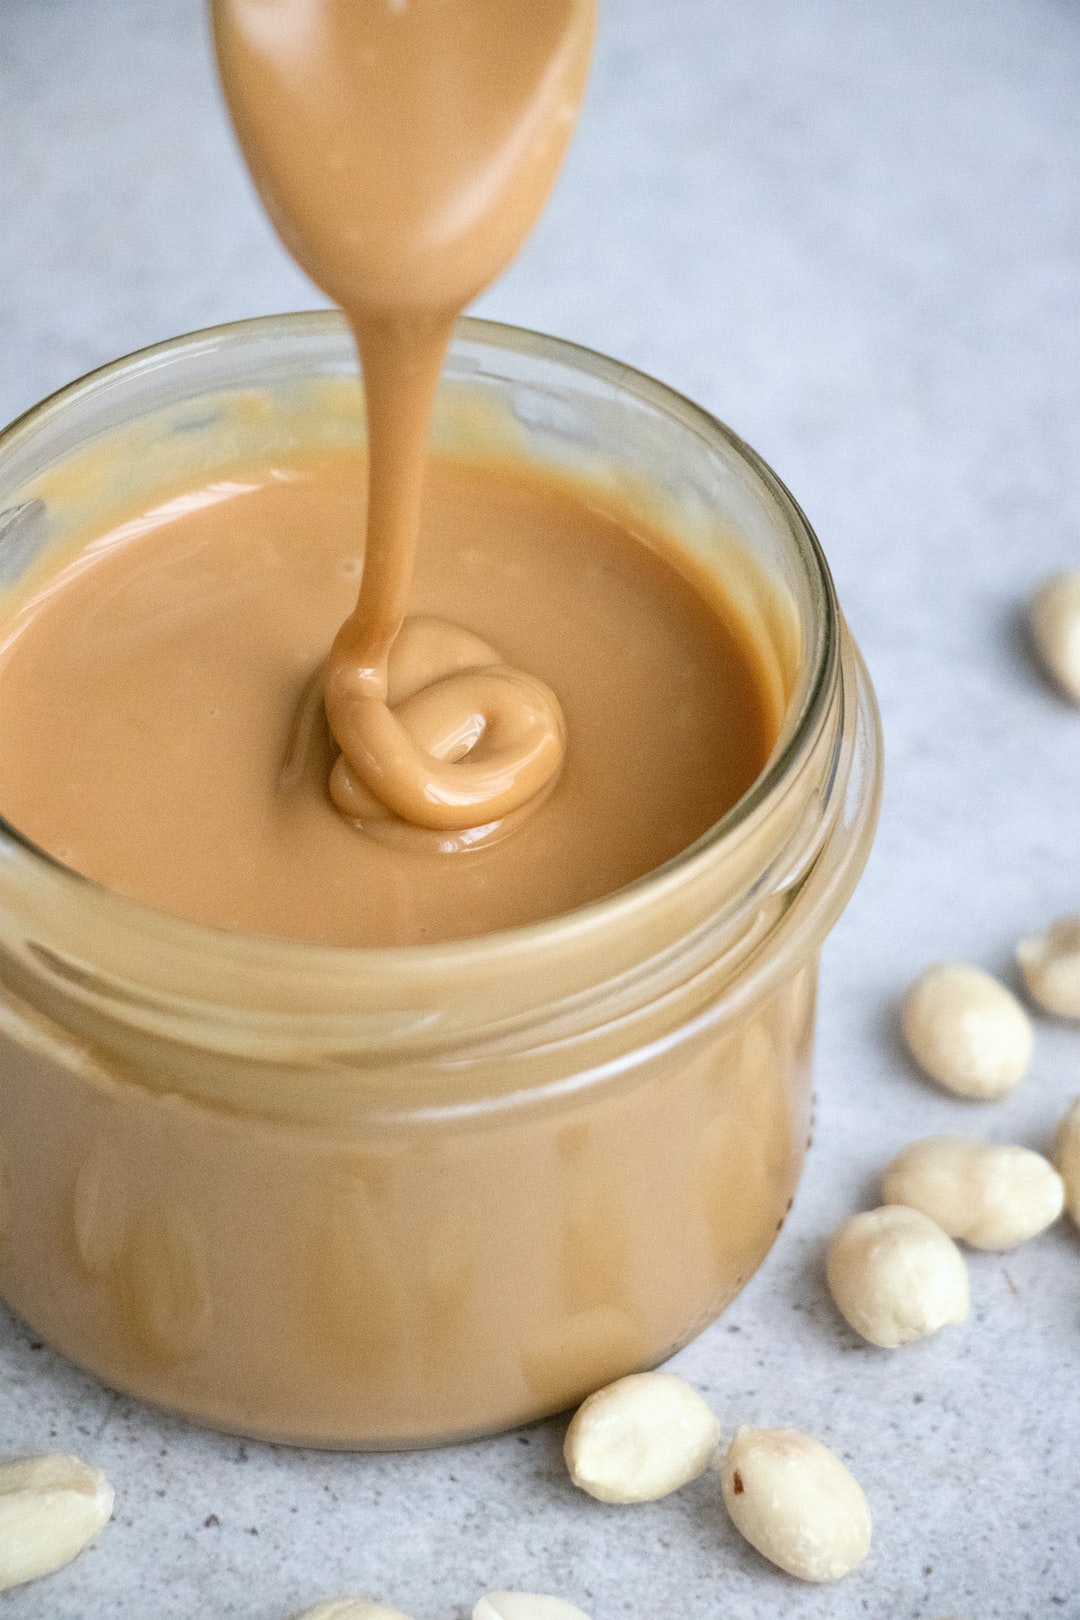 Sugar in Peanut Butter: What Type and How Much?